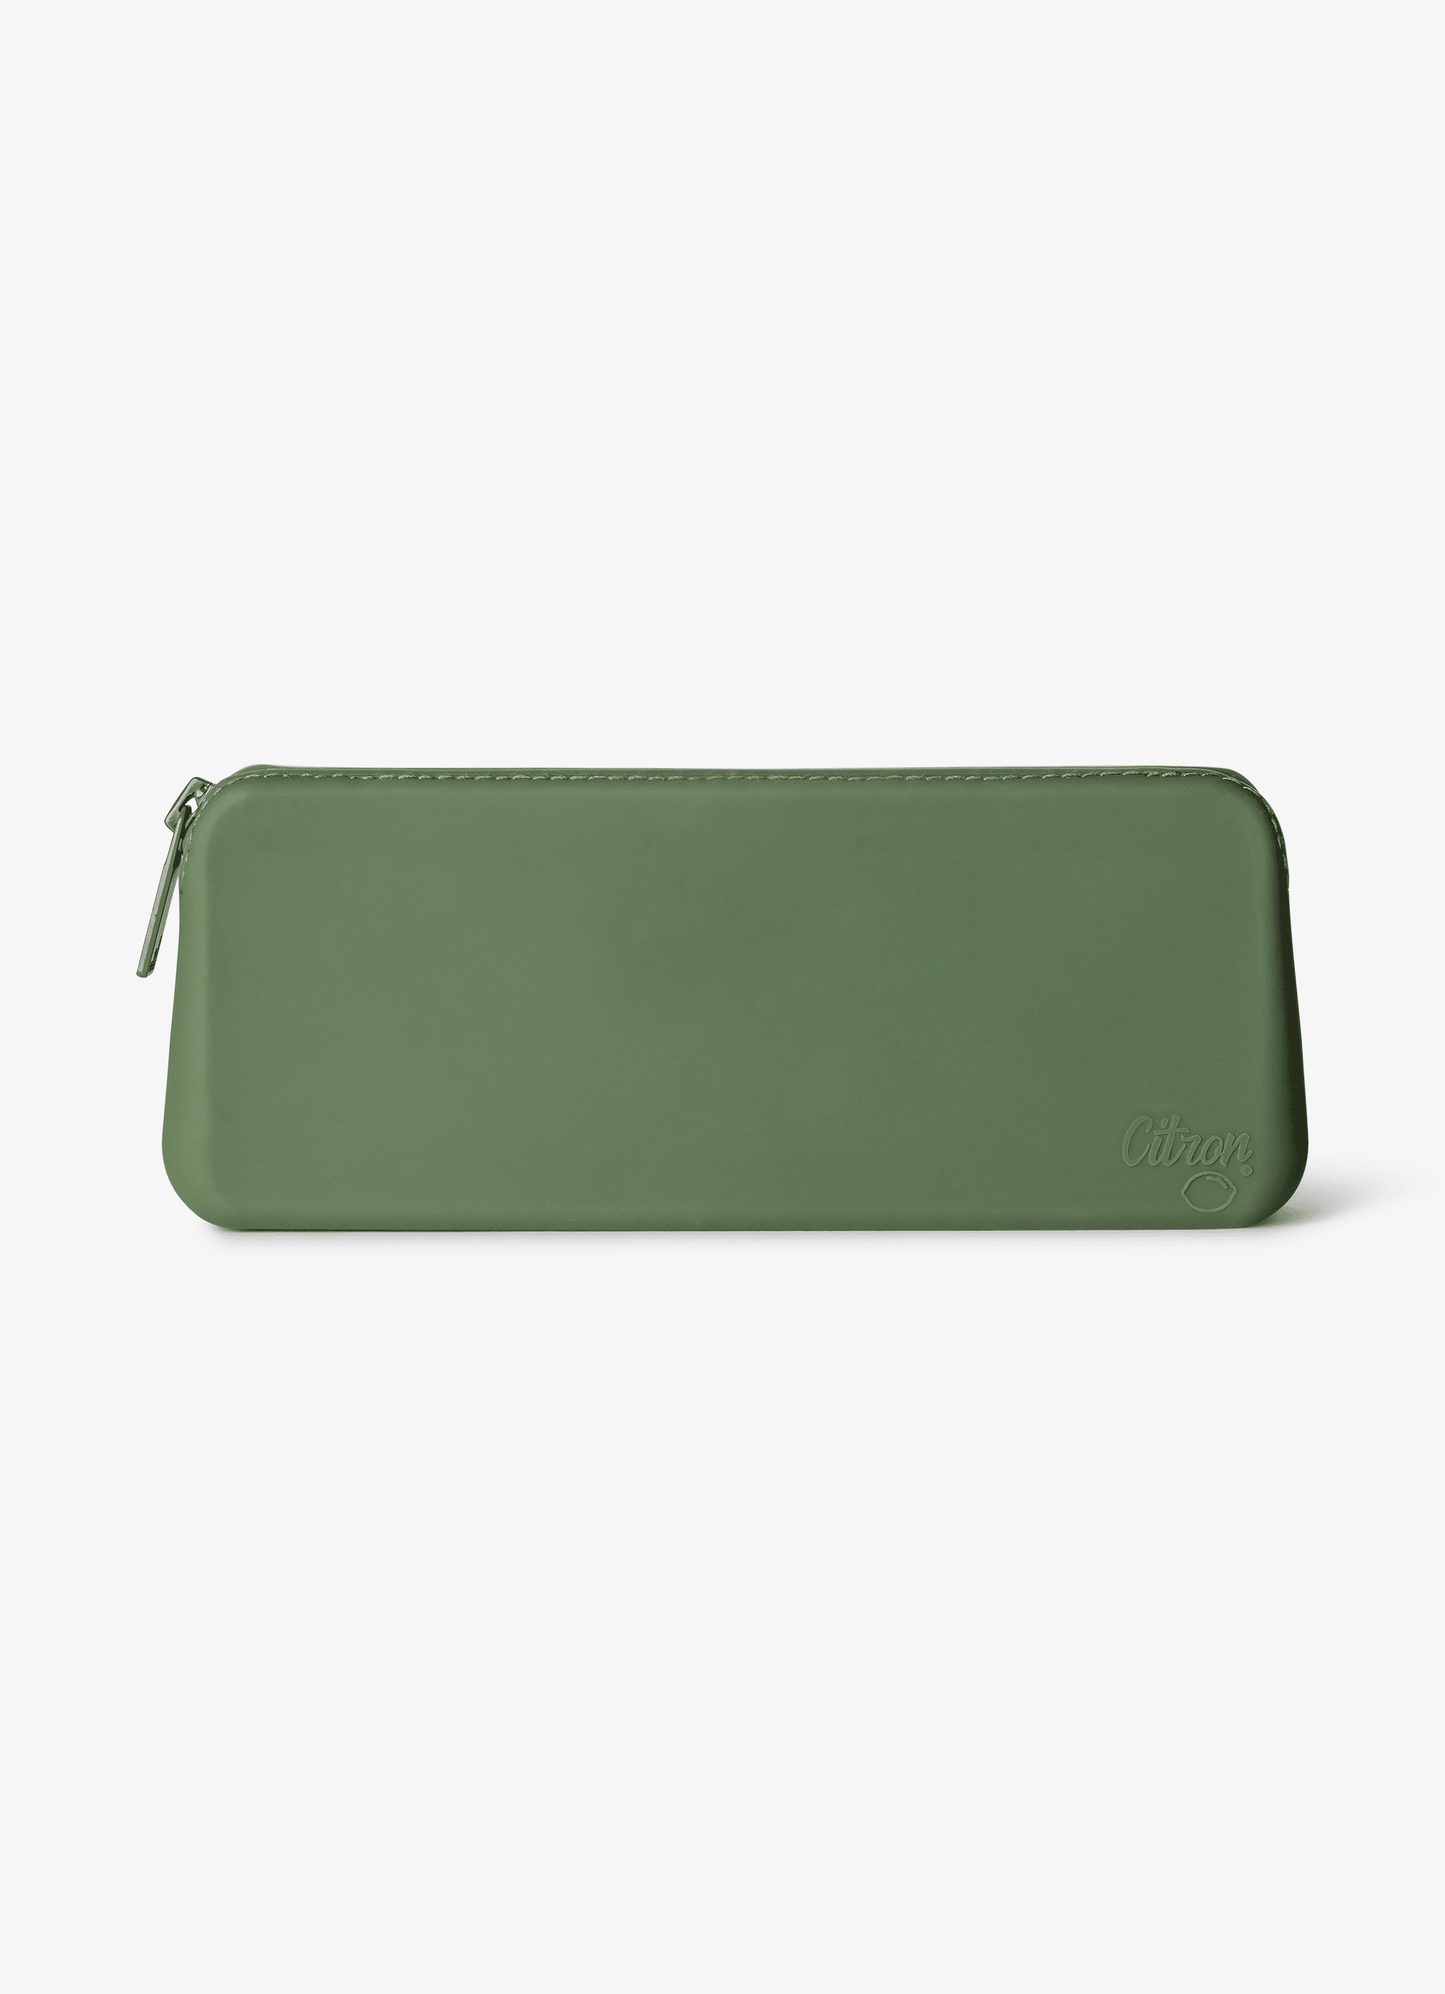 Silicone Cutlery Pouch - Green